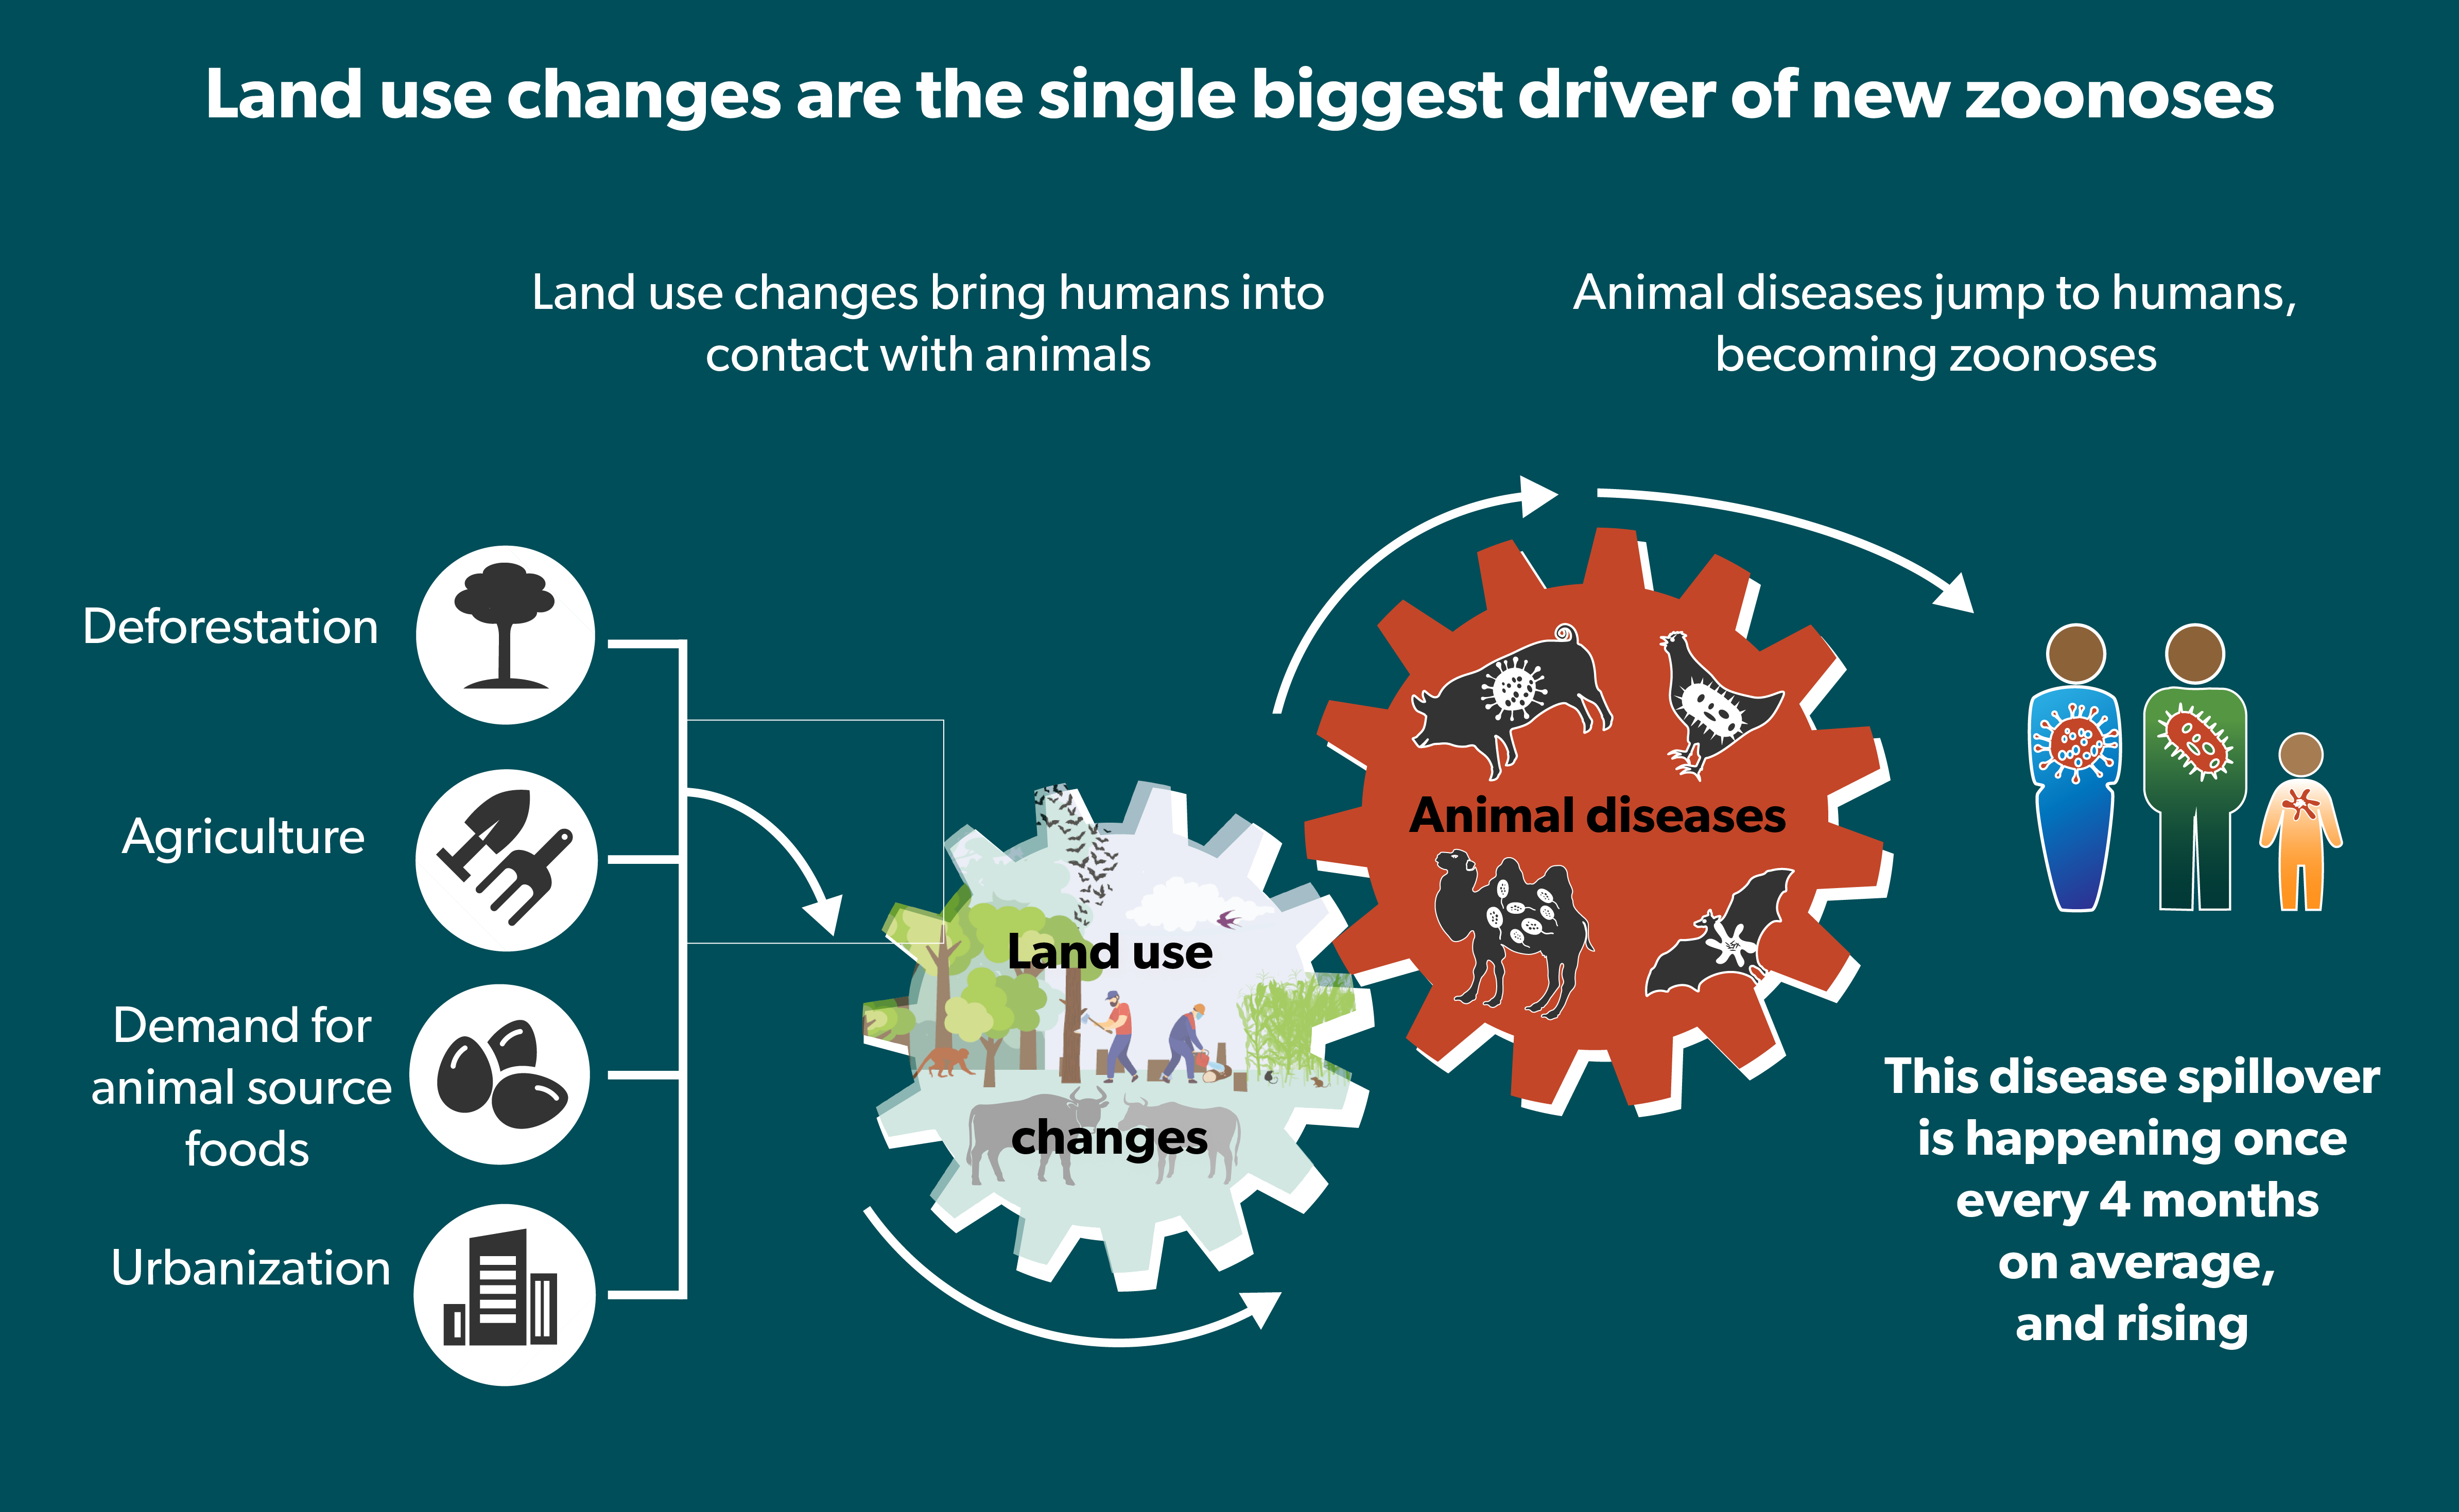 Land use changes drive zoonosis spillover events